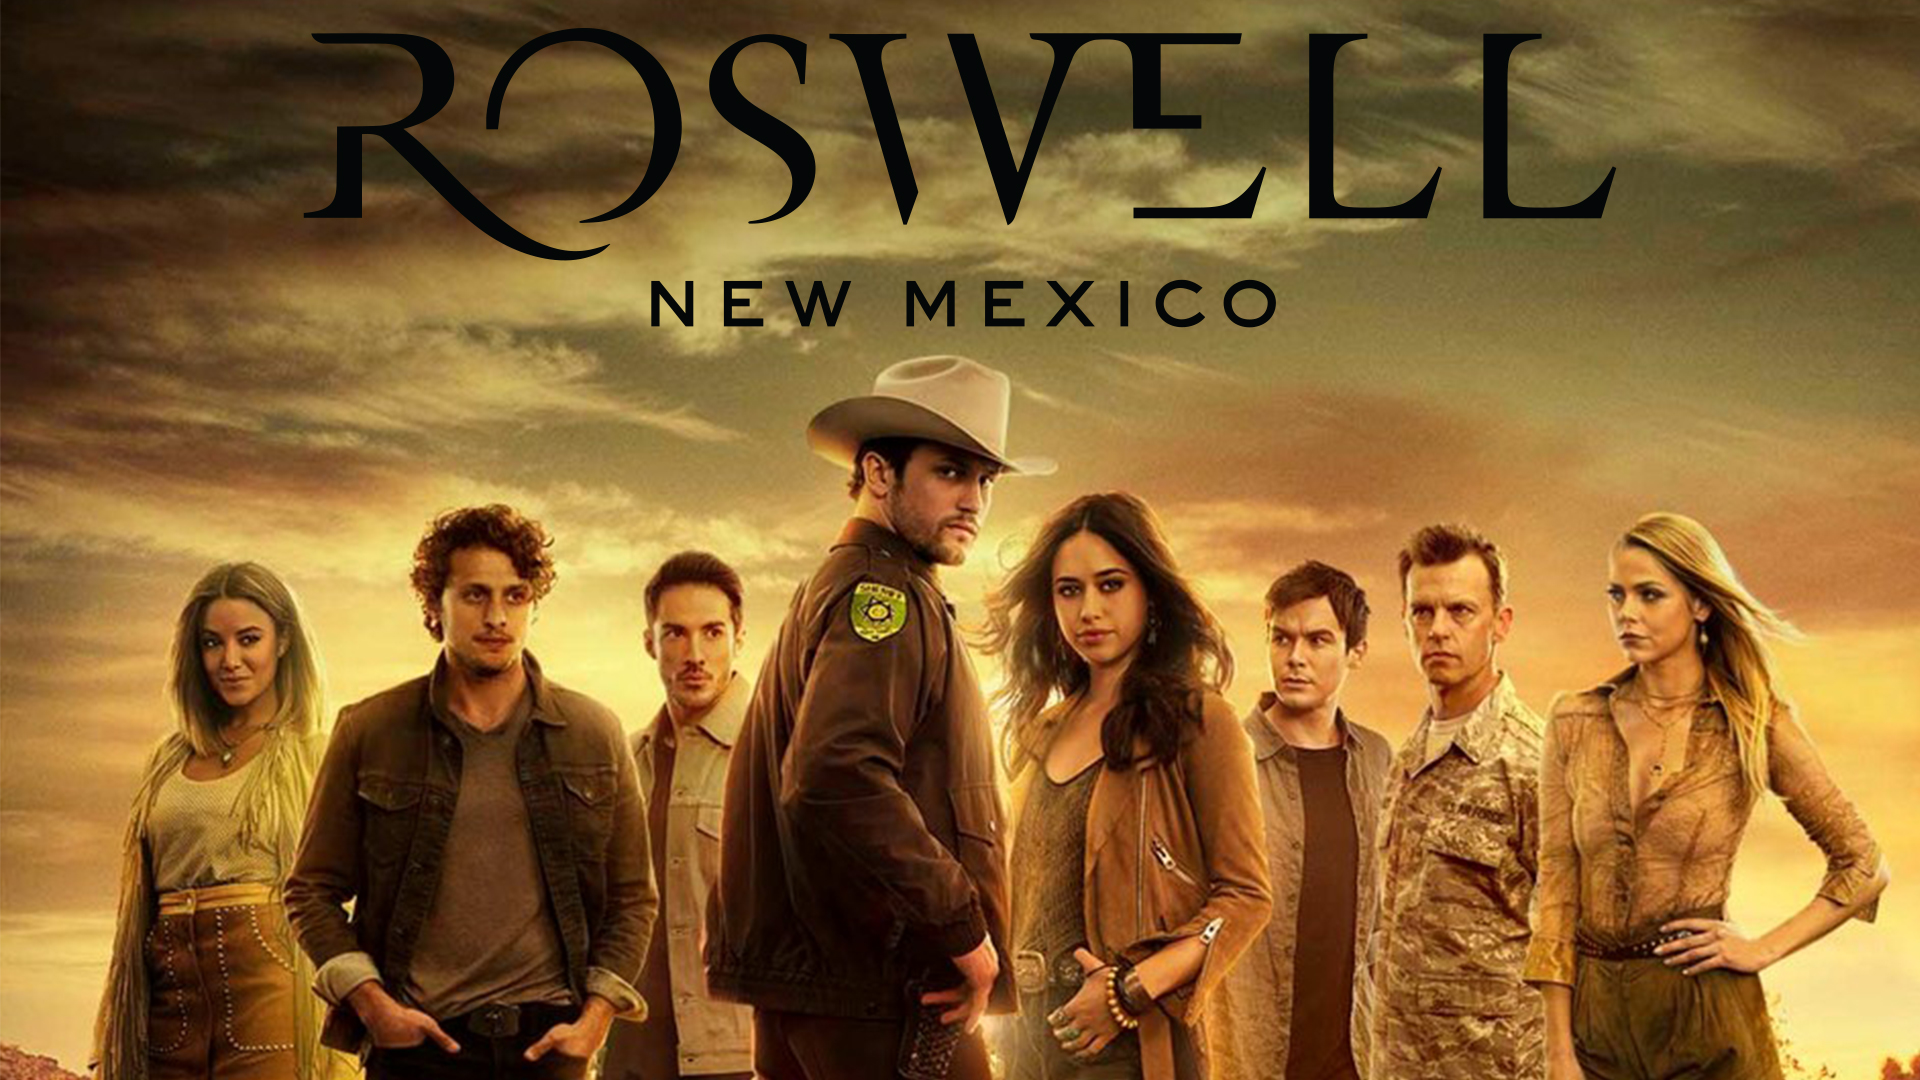 Roswell New Mexico feat image 1